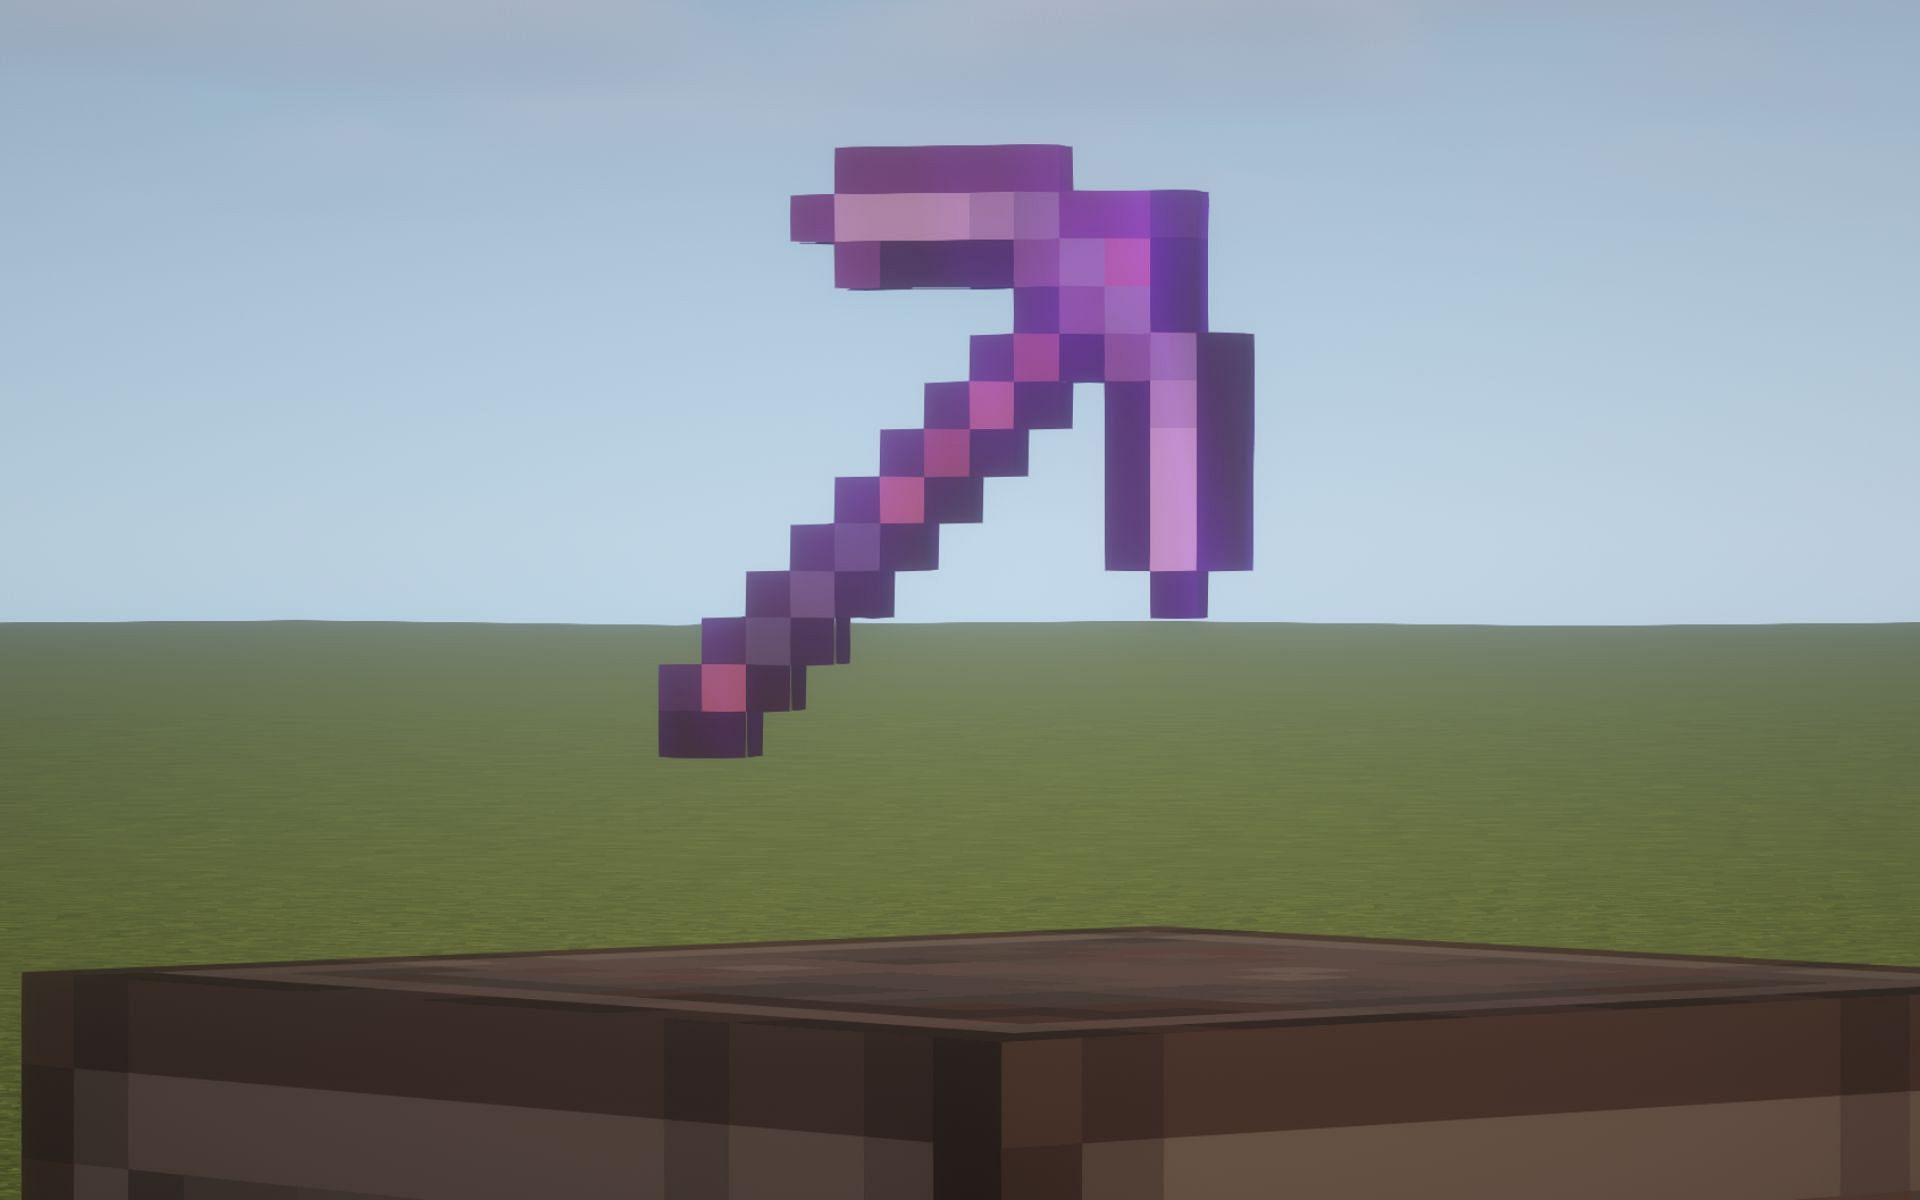 A pickaxe is an essential tool needed for mining in Minecraft (Image via Mojang)